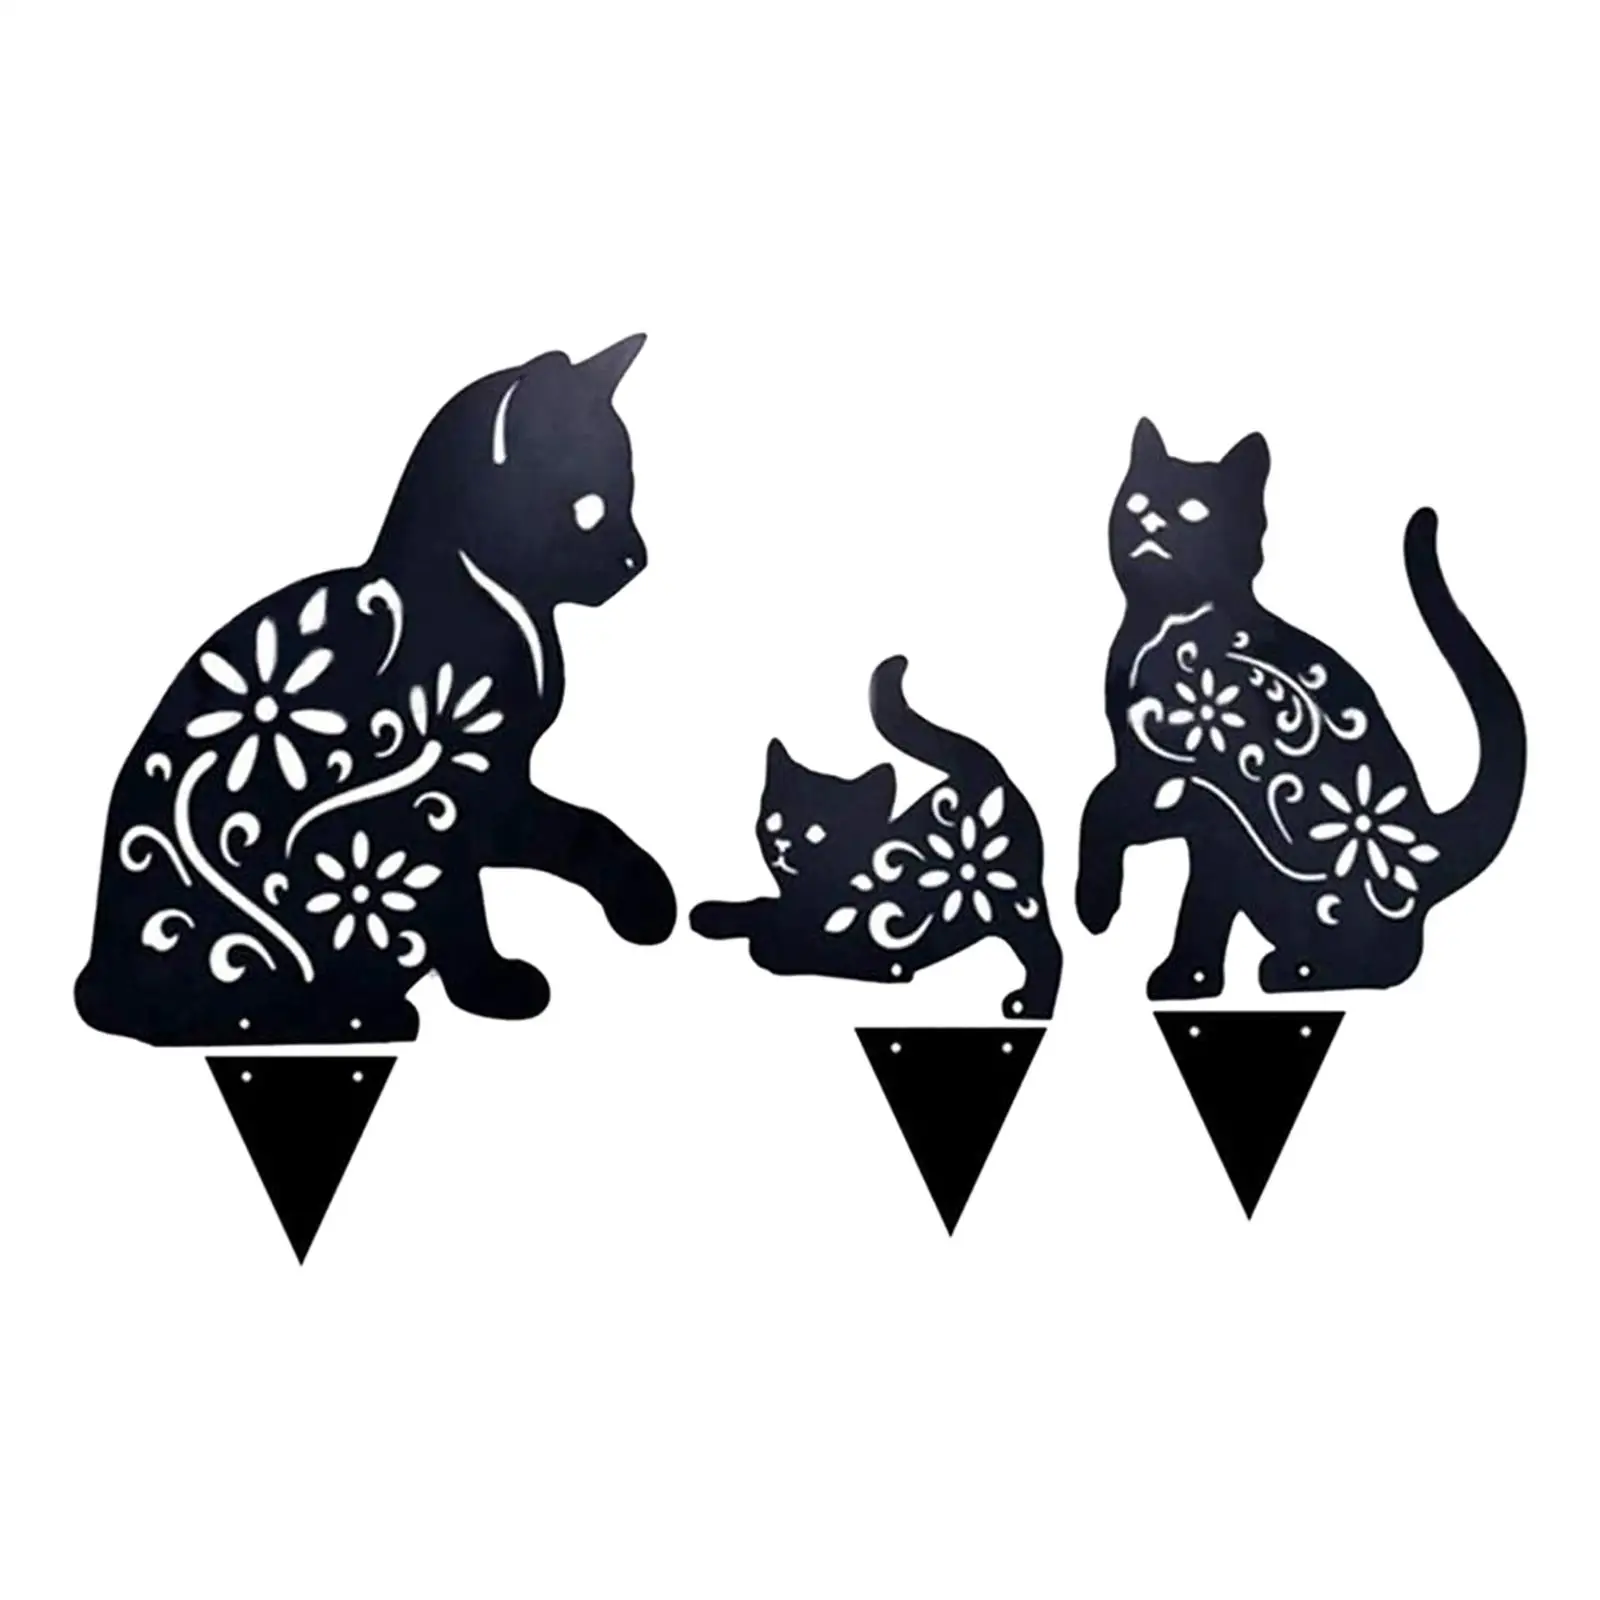 3Pieces Garden Cat Stakes Animals Statue for Home Outdoor Yard Decor Arts